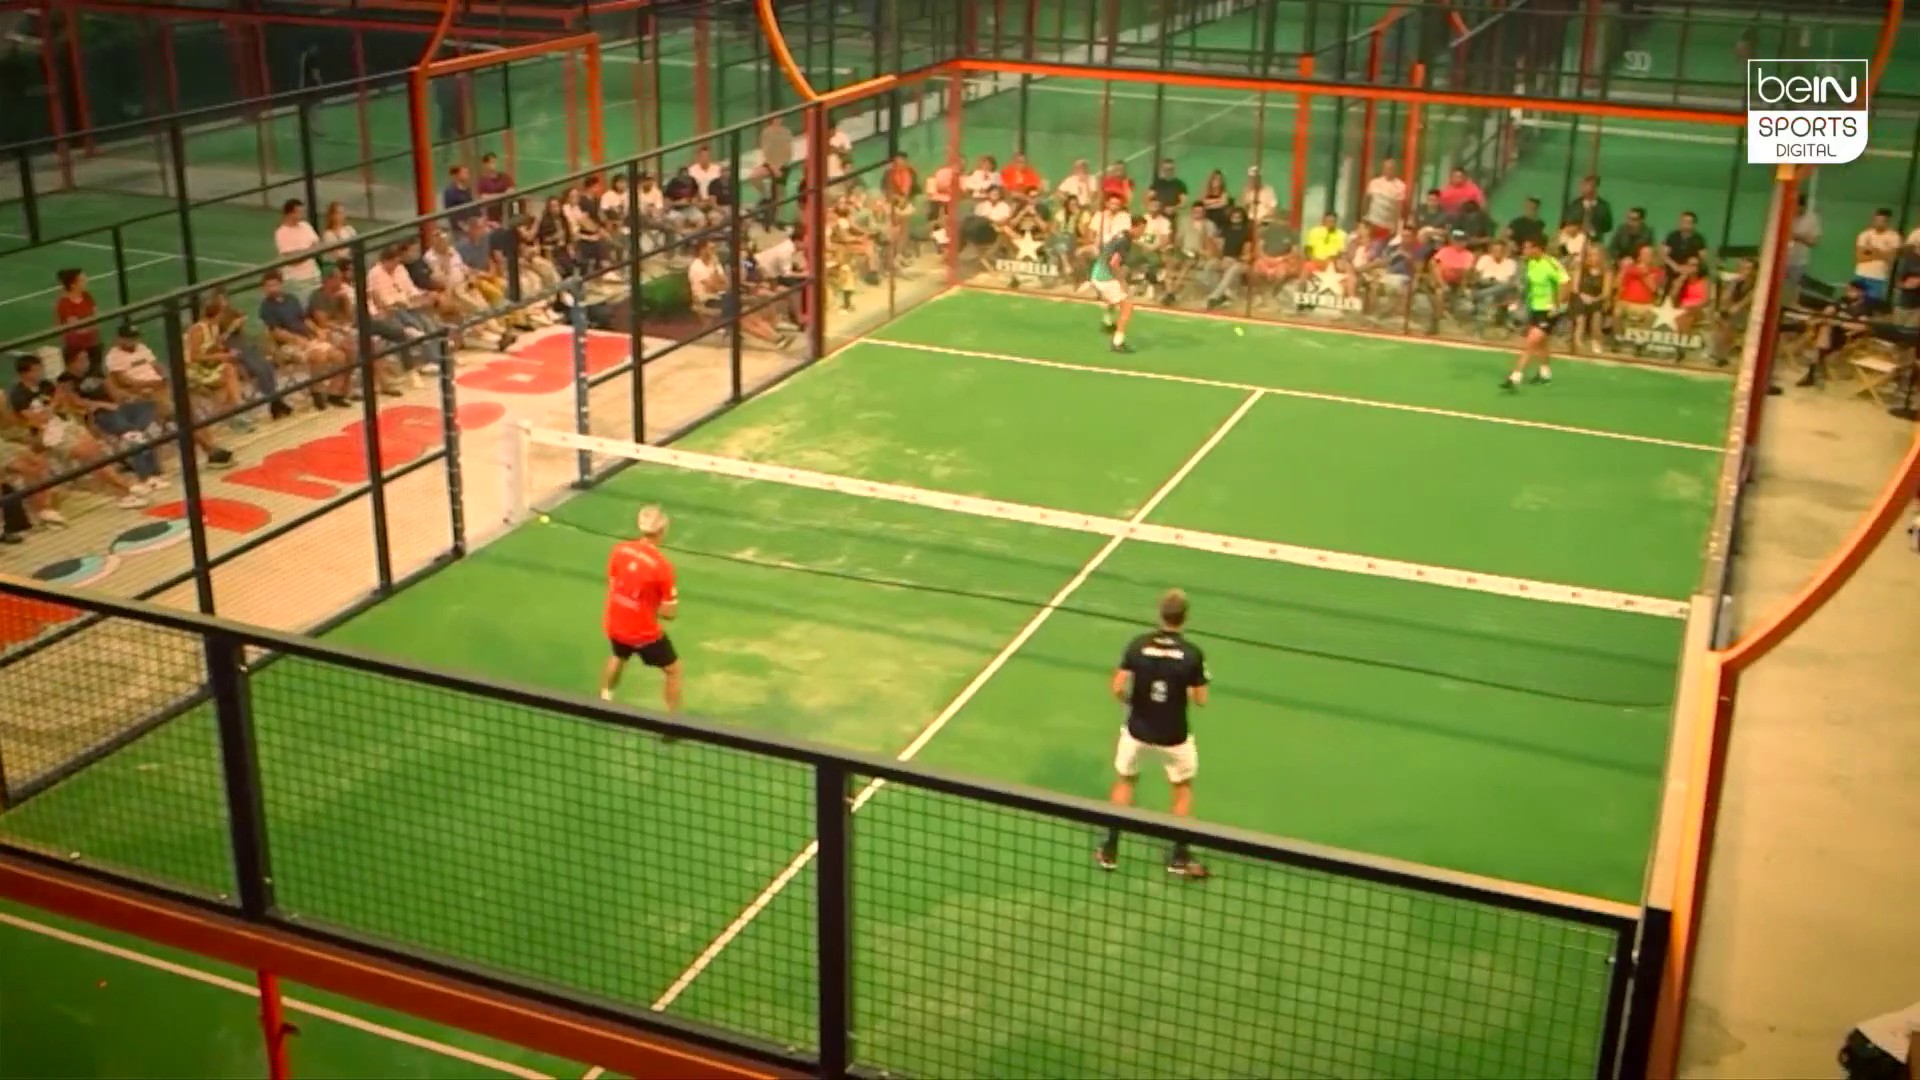 Padel: "The Fastest Growing Sport in the World"